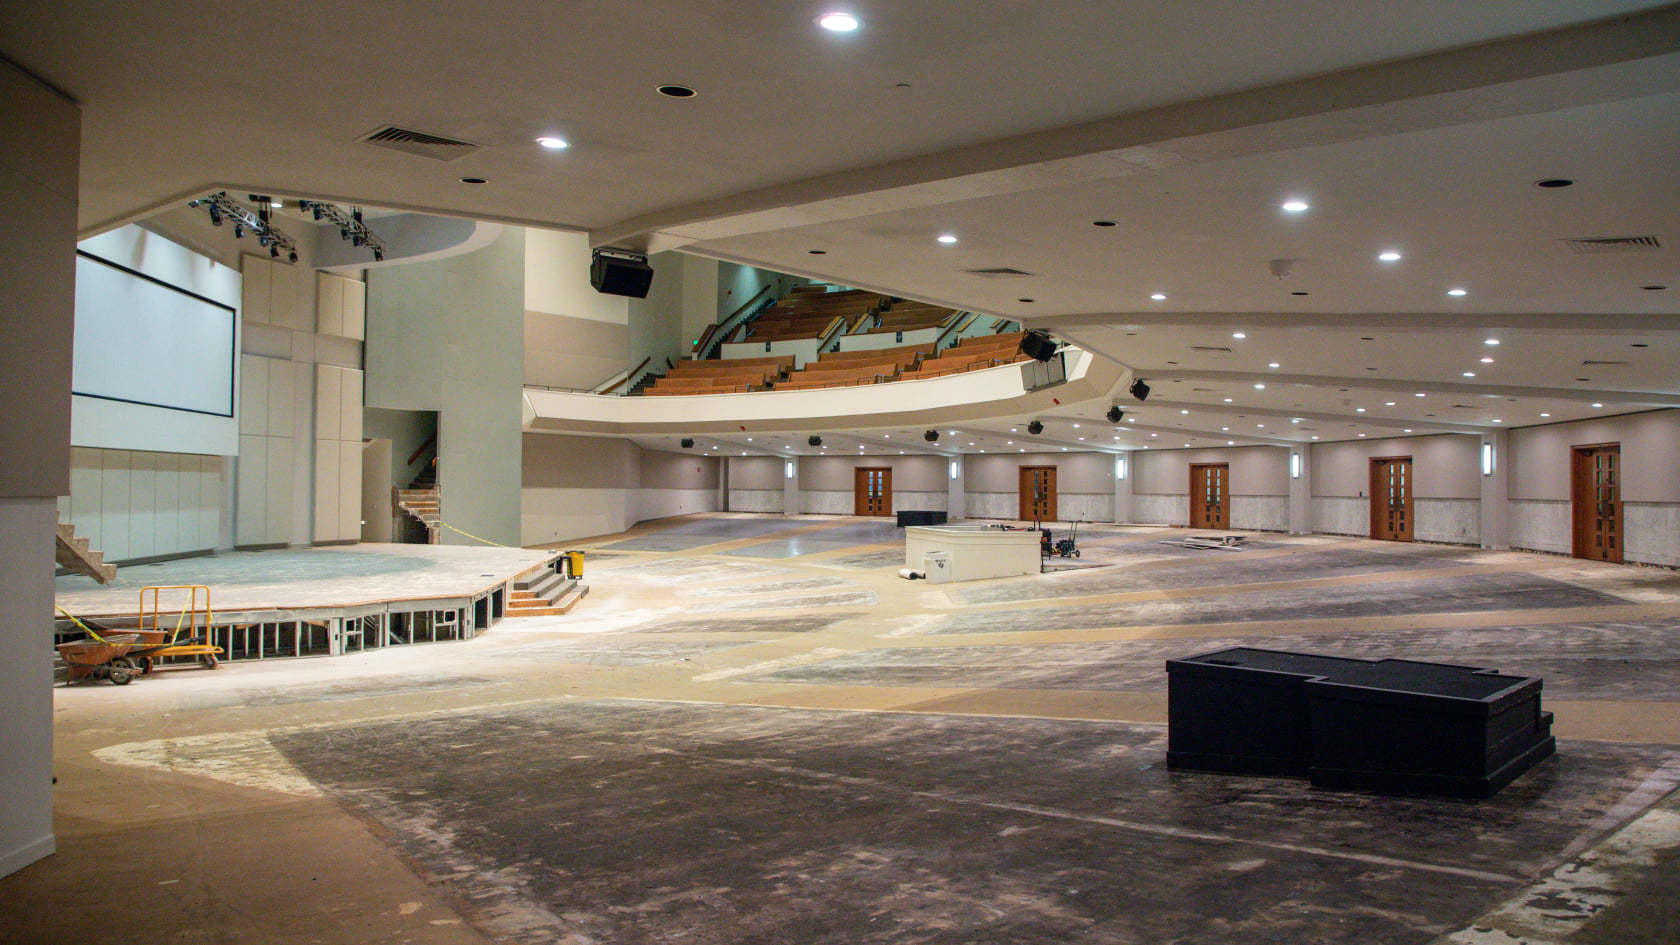 Renovation work at Lindsay Memorial Auditorium in this photo from Dec. 3 from the First Baptist Church Facebook page.